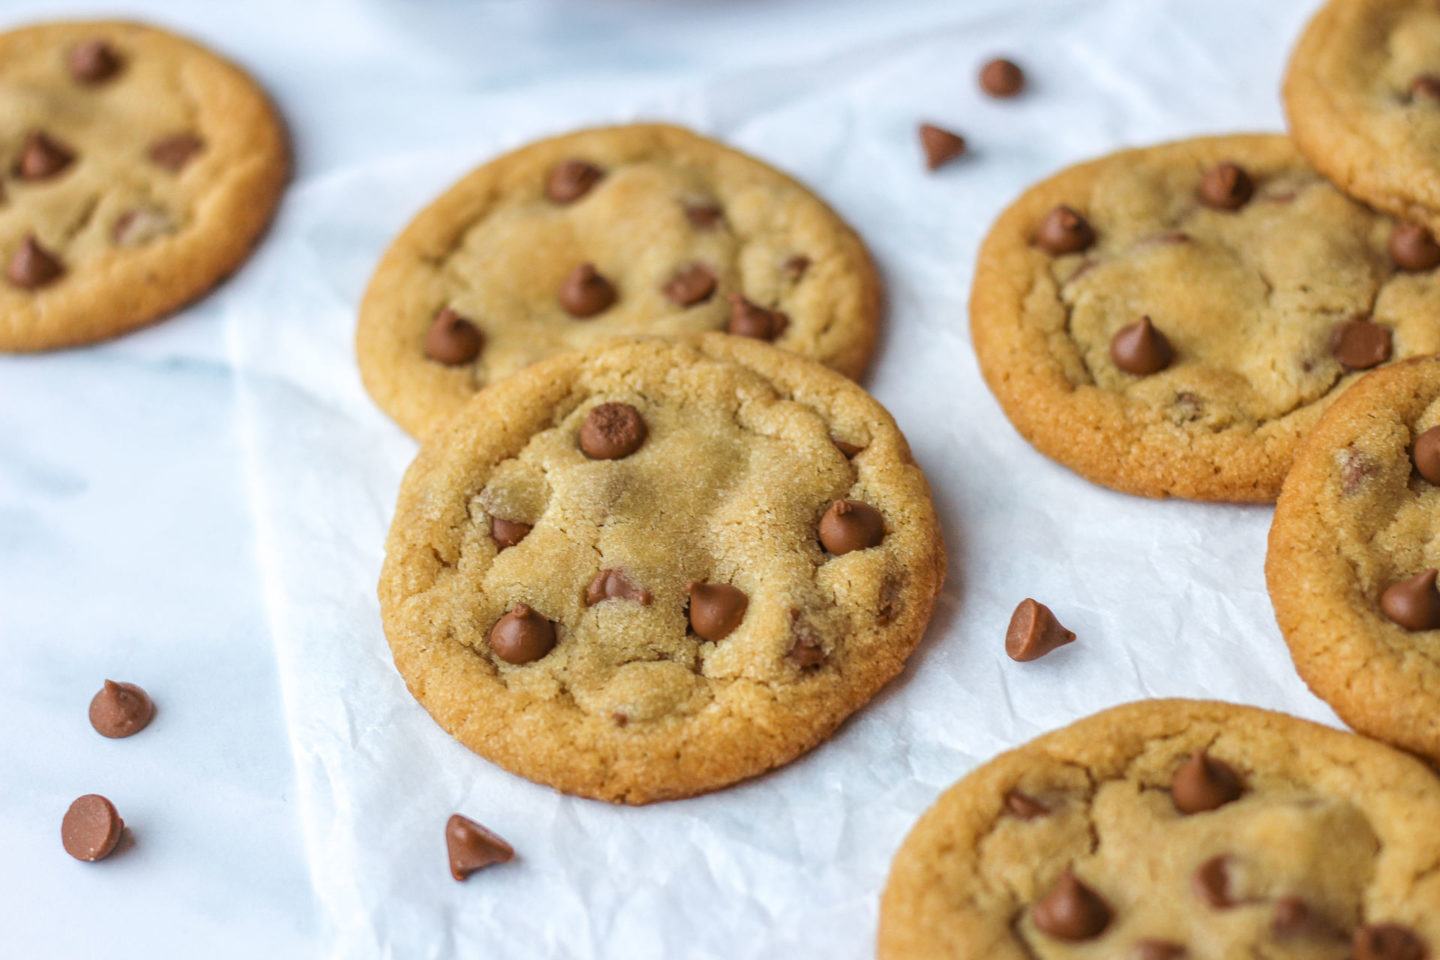 Several chewy chocolate chip cookies on parchment paper on a work surface